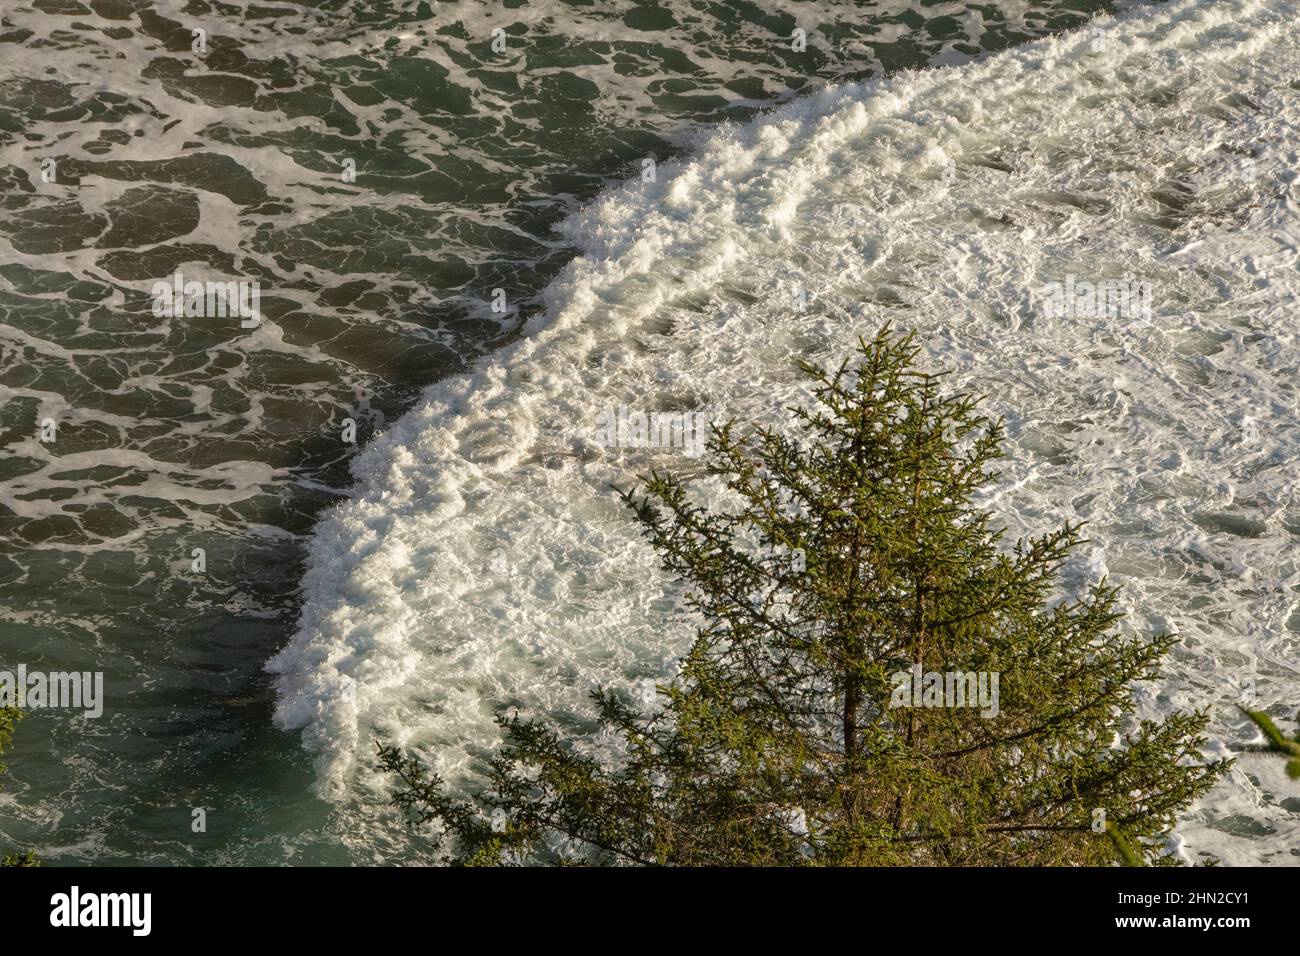 Incoming wave from above, Oregon Coast Stock Photo